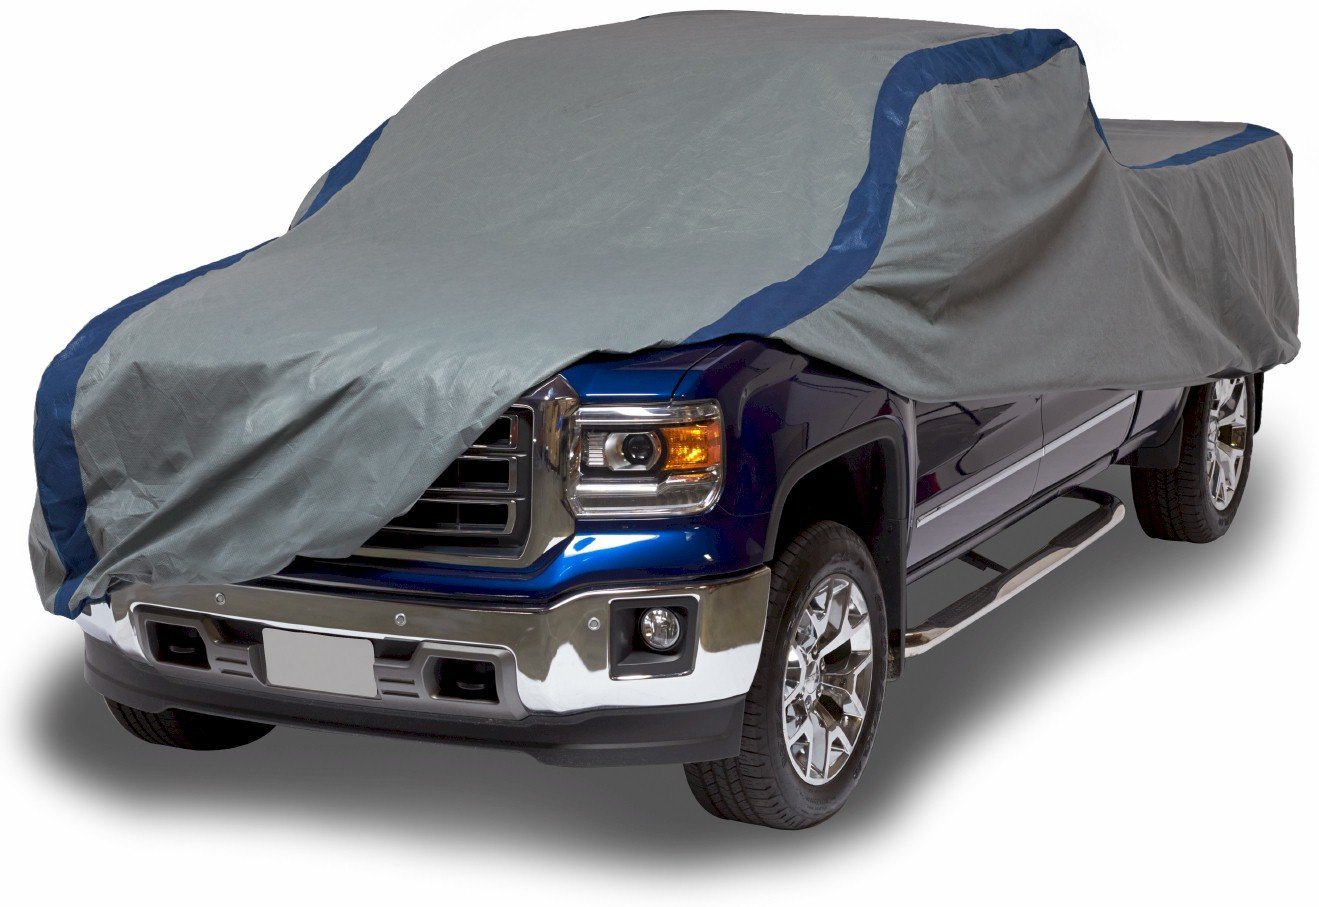 The Best Truck Protection – Indoor & Out